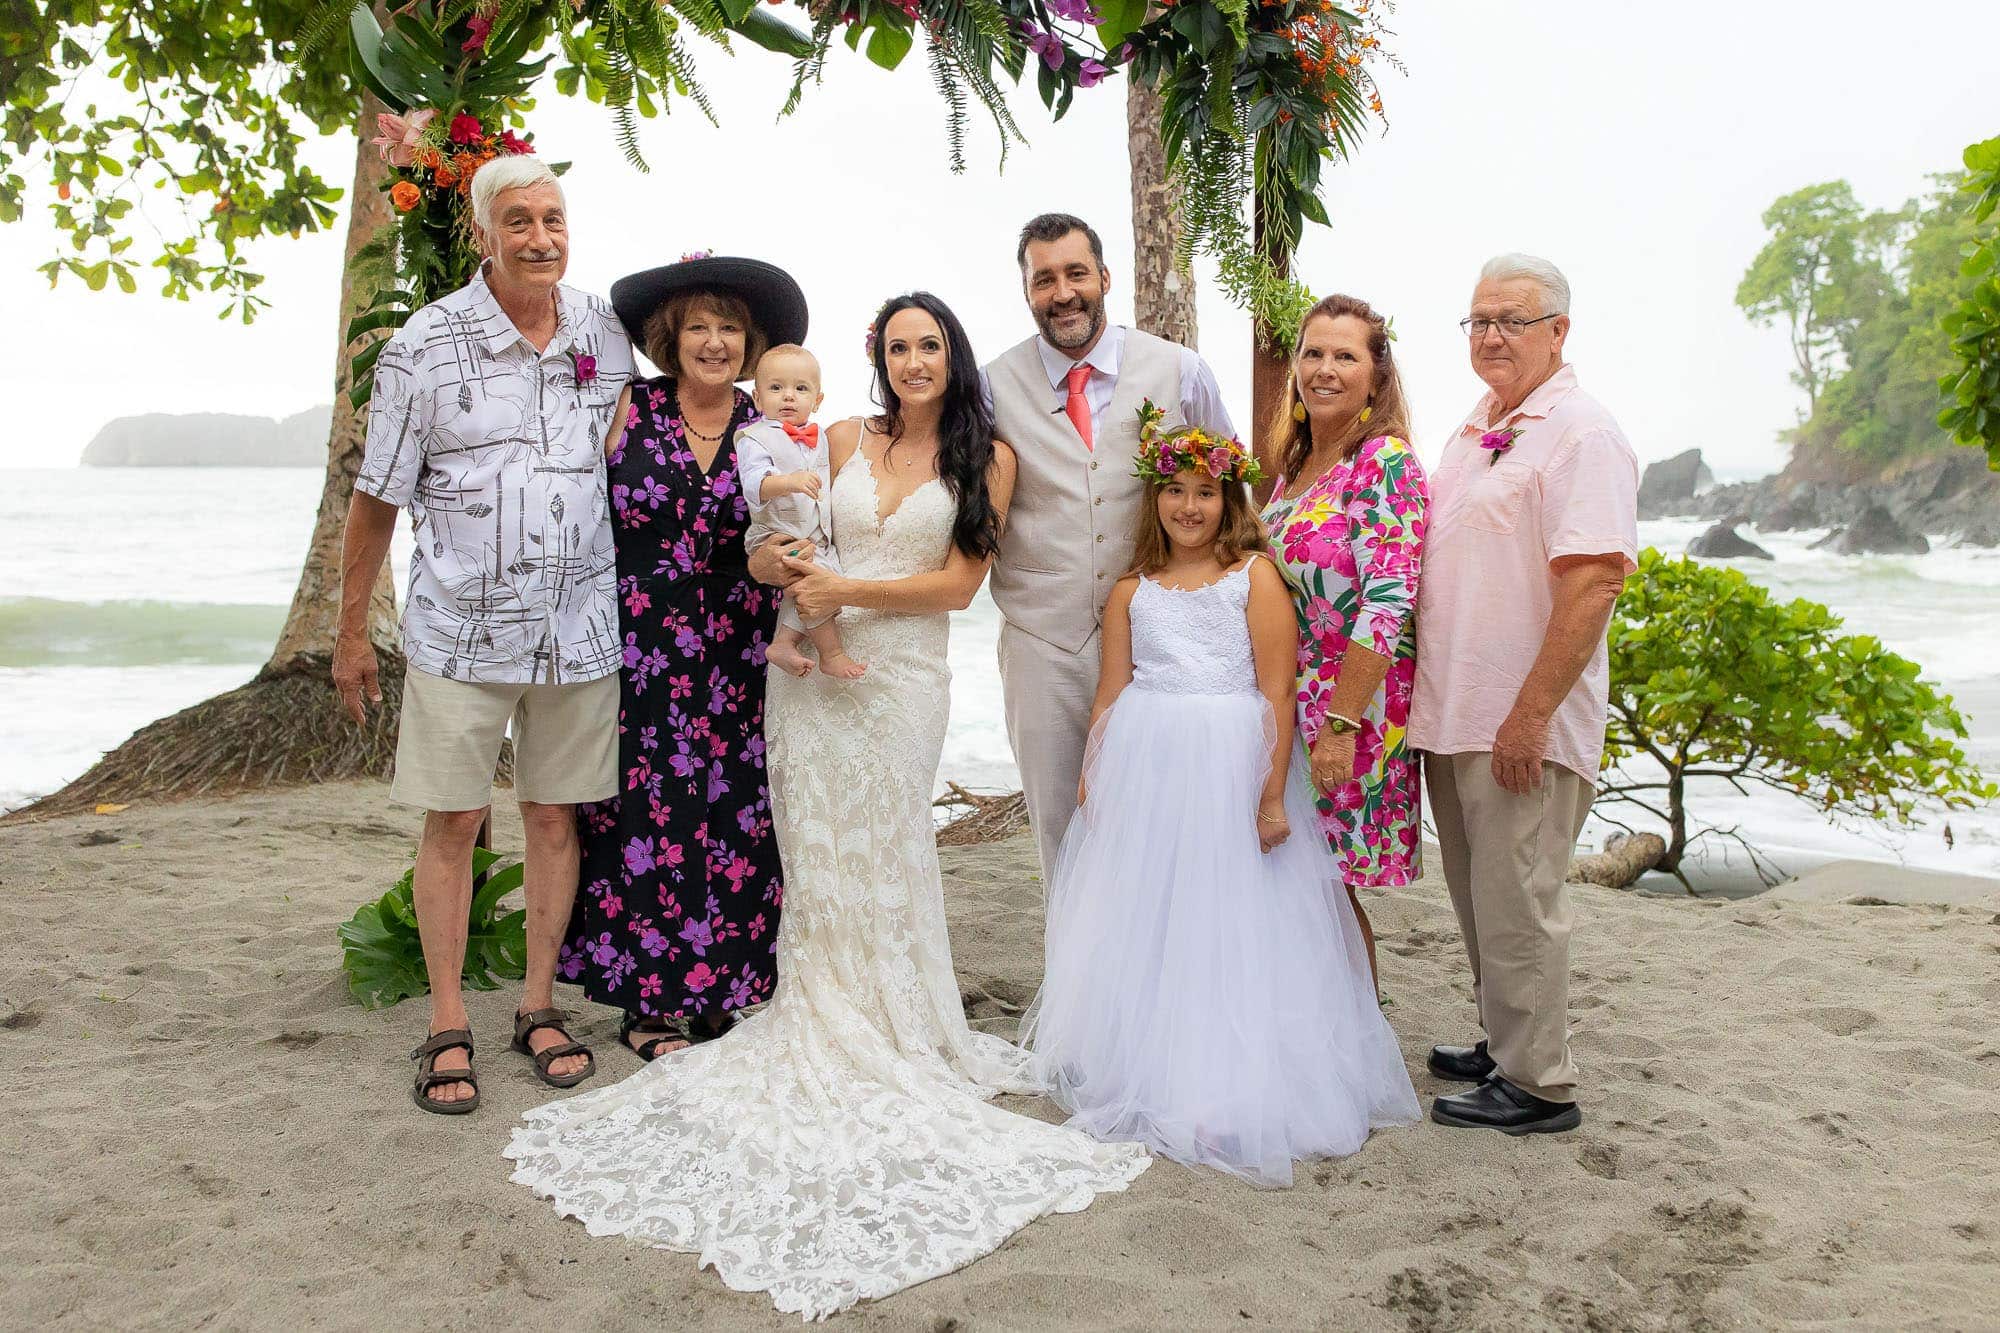 Family portrait from a wedding at an eco resort in Costa Rica